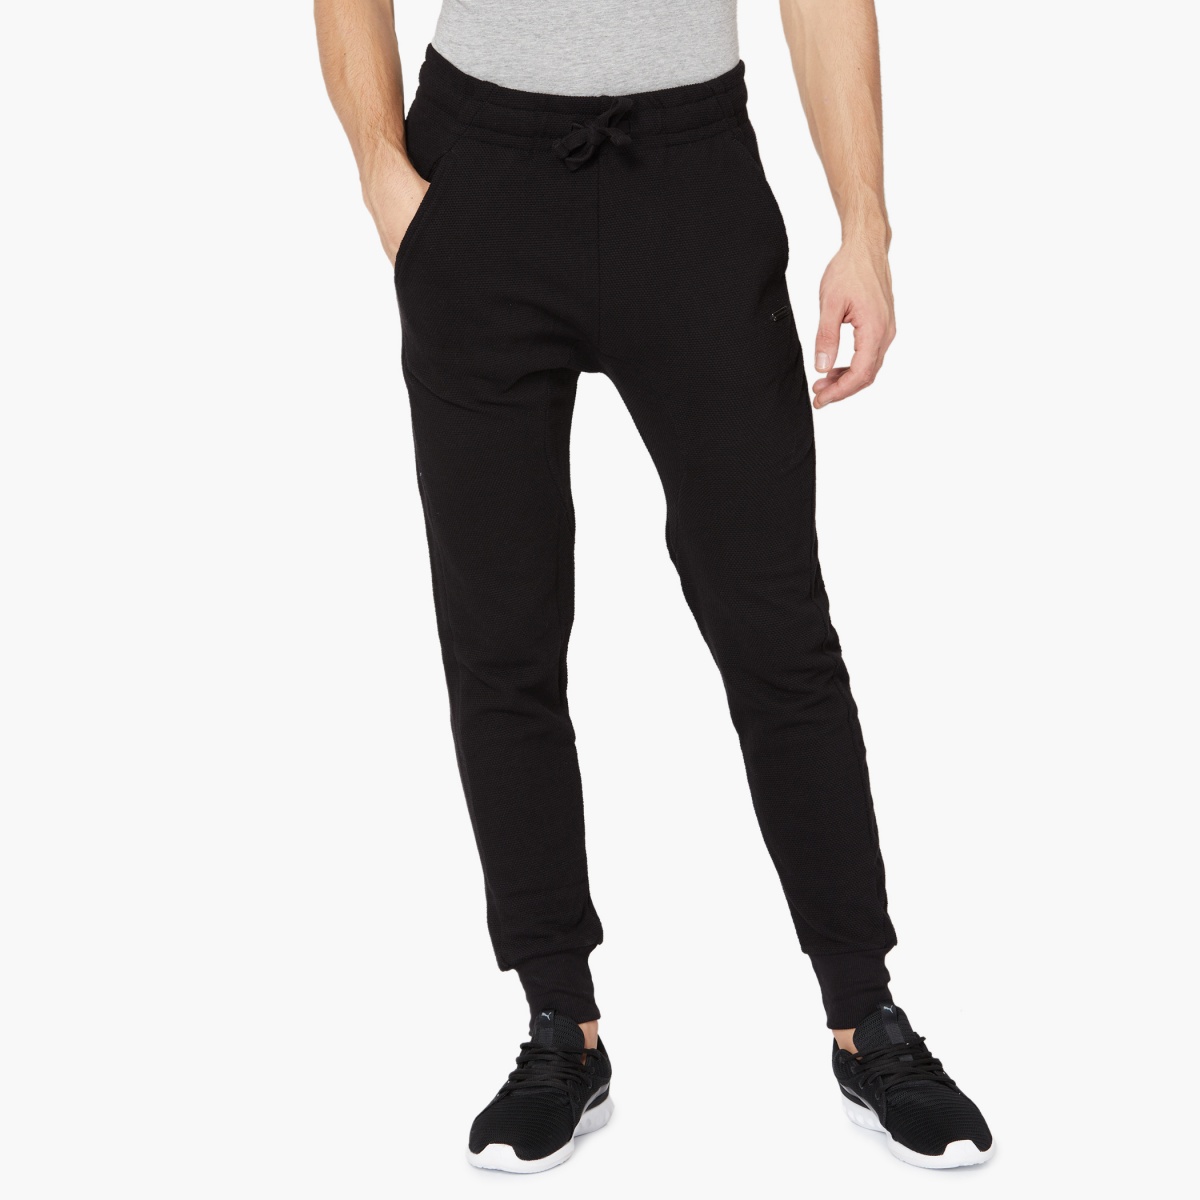 CHROMOZOME Insert Pockets Solid Joggers